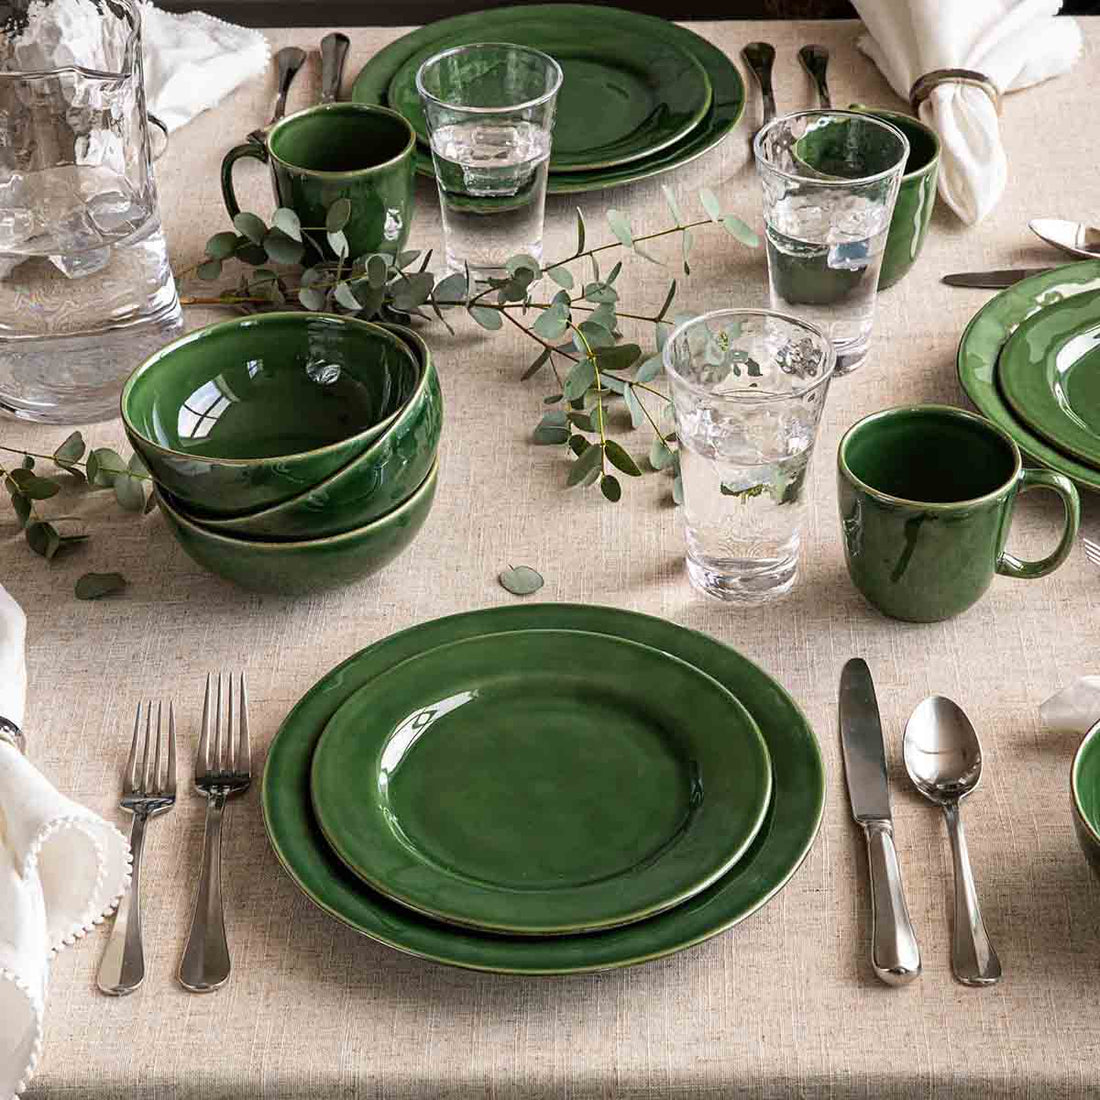 A table setting with Juliska Puro Basil Dinnerware dishes, silverware, glasses, and a natural greenery decoration.